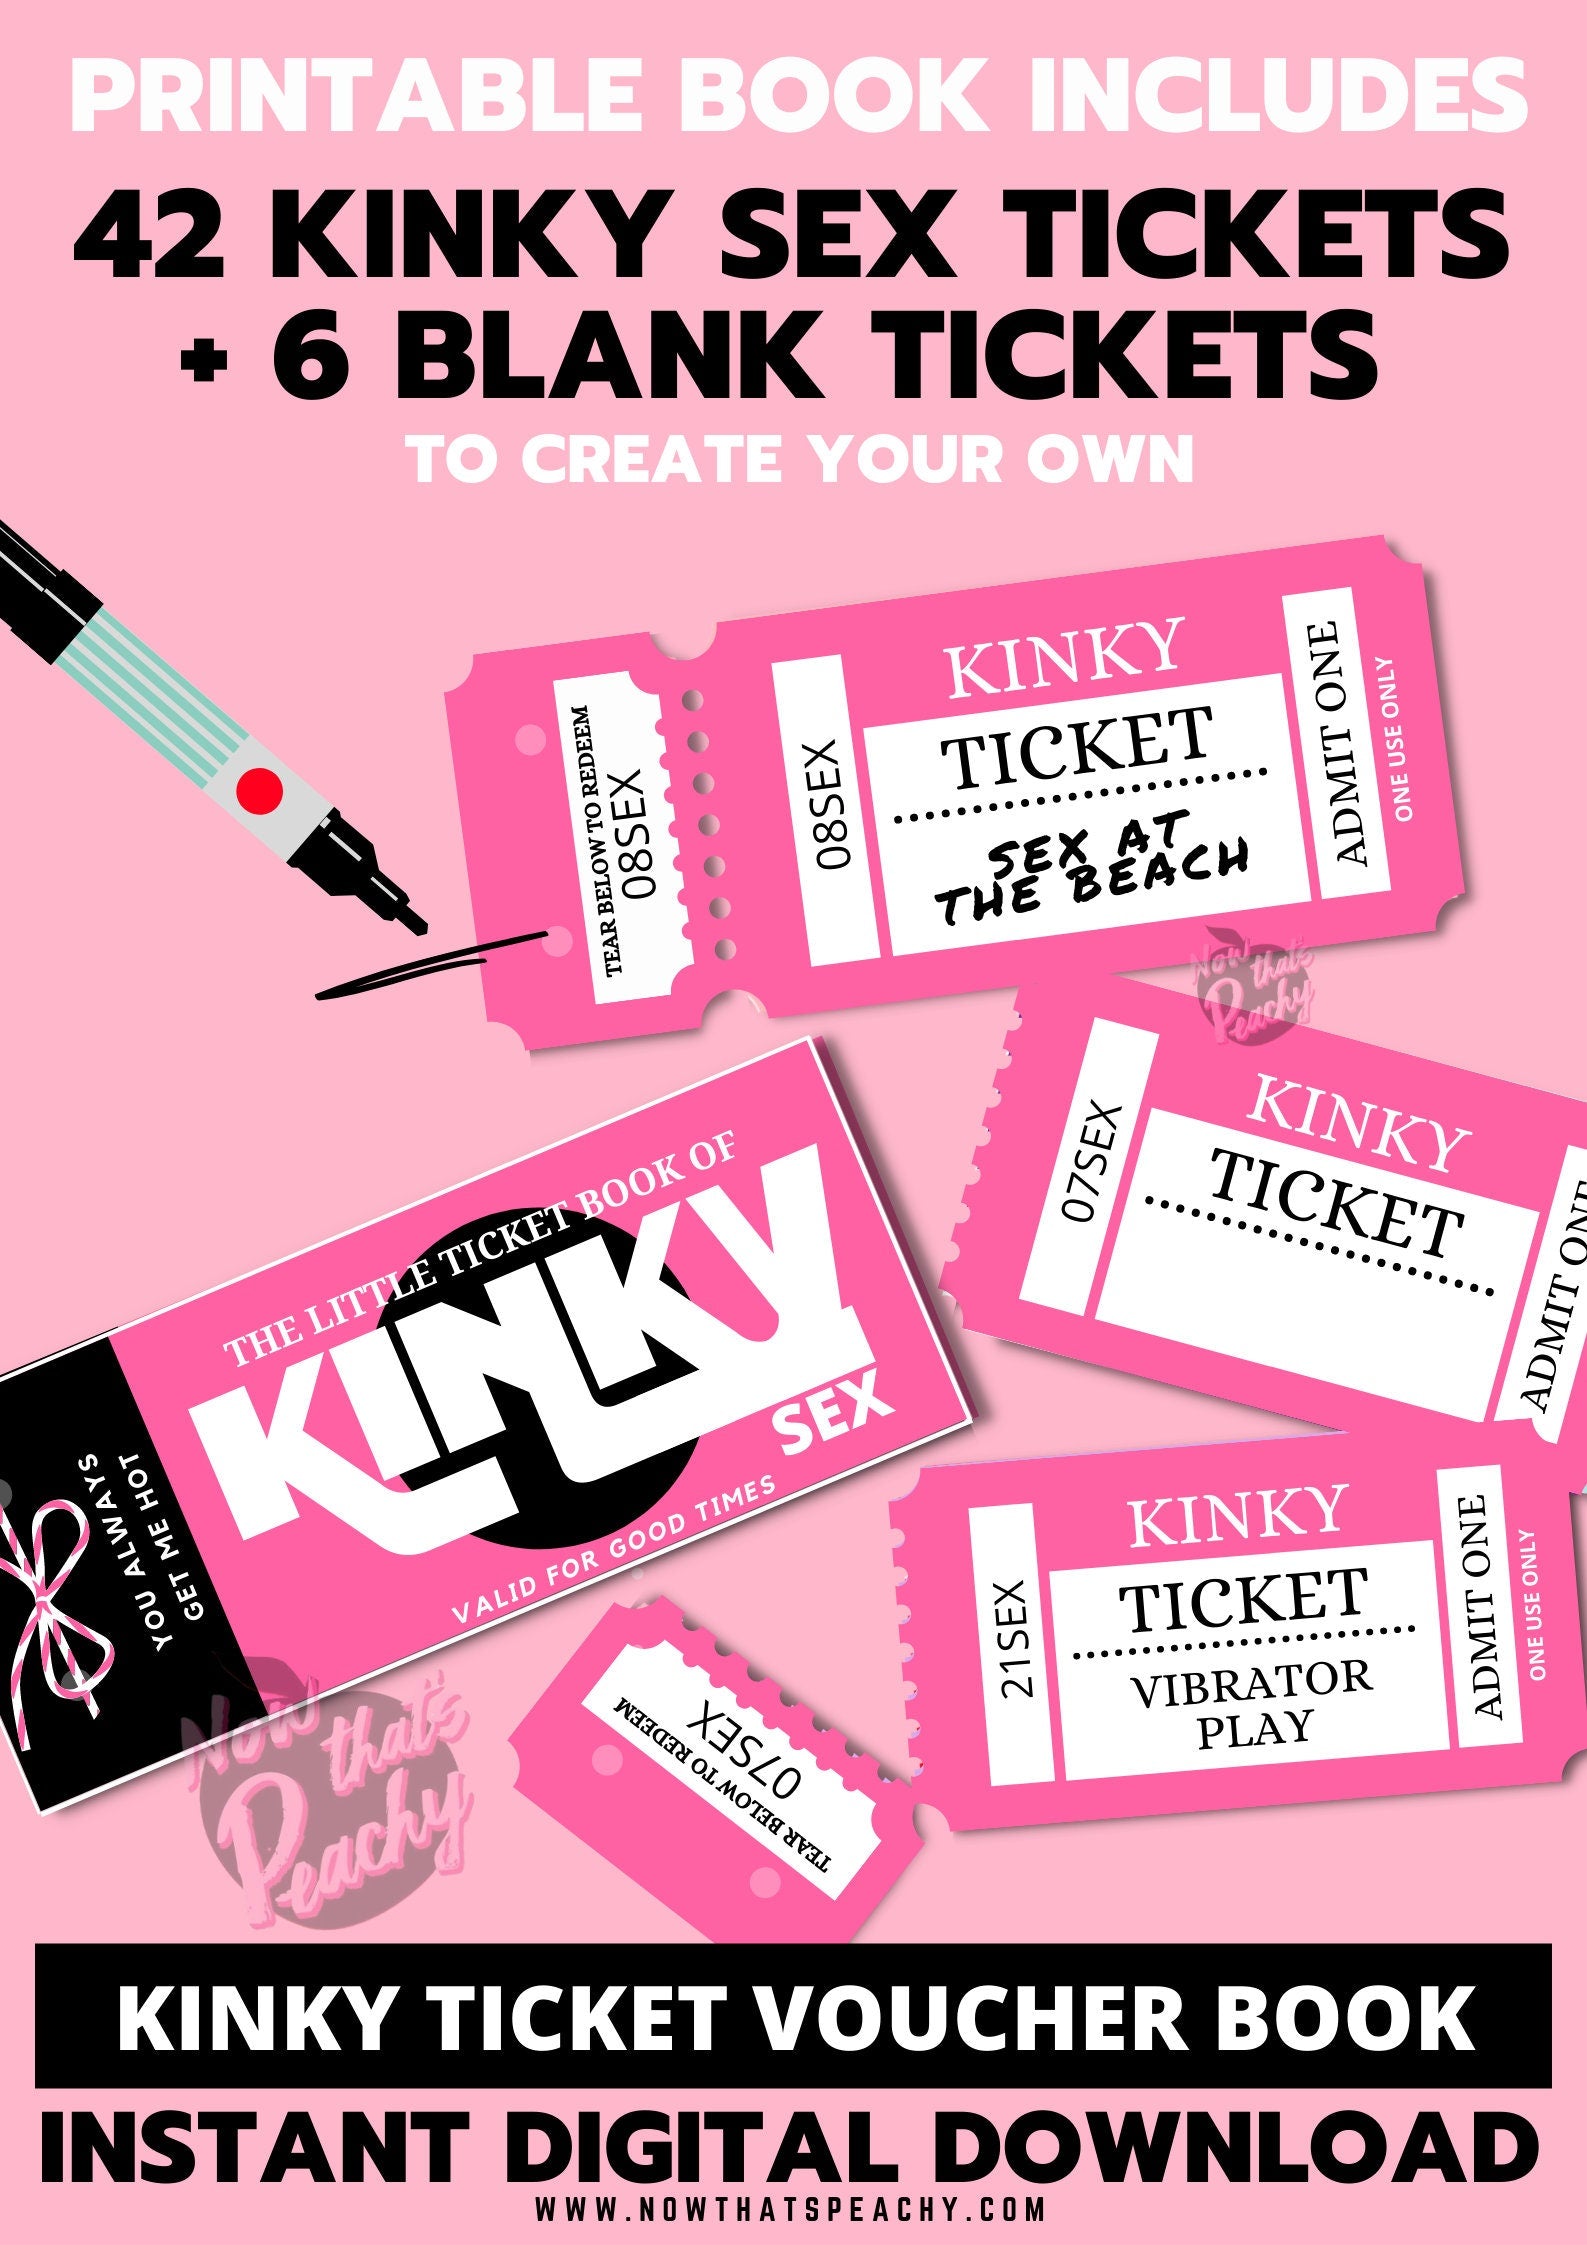 KINKY SEX TICKET Voucher Book Printable Download Valentines Day Annive photo